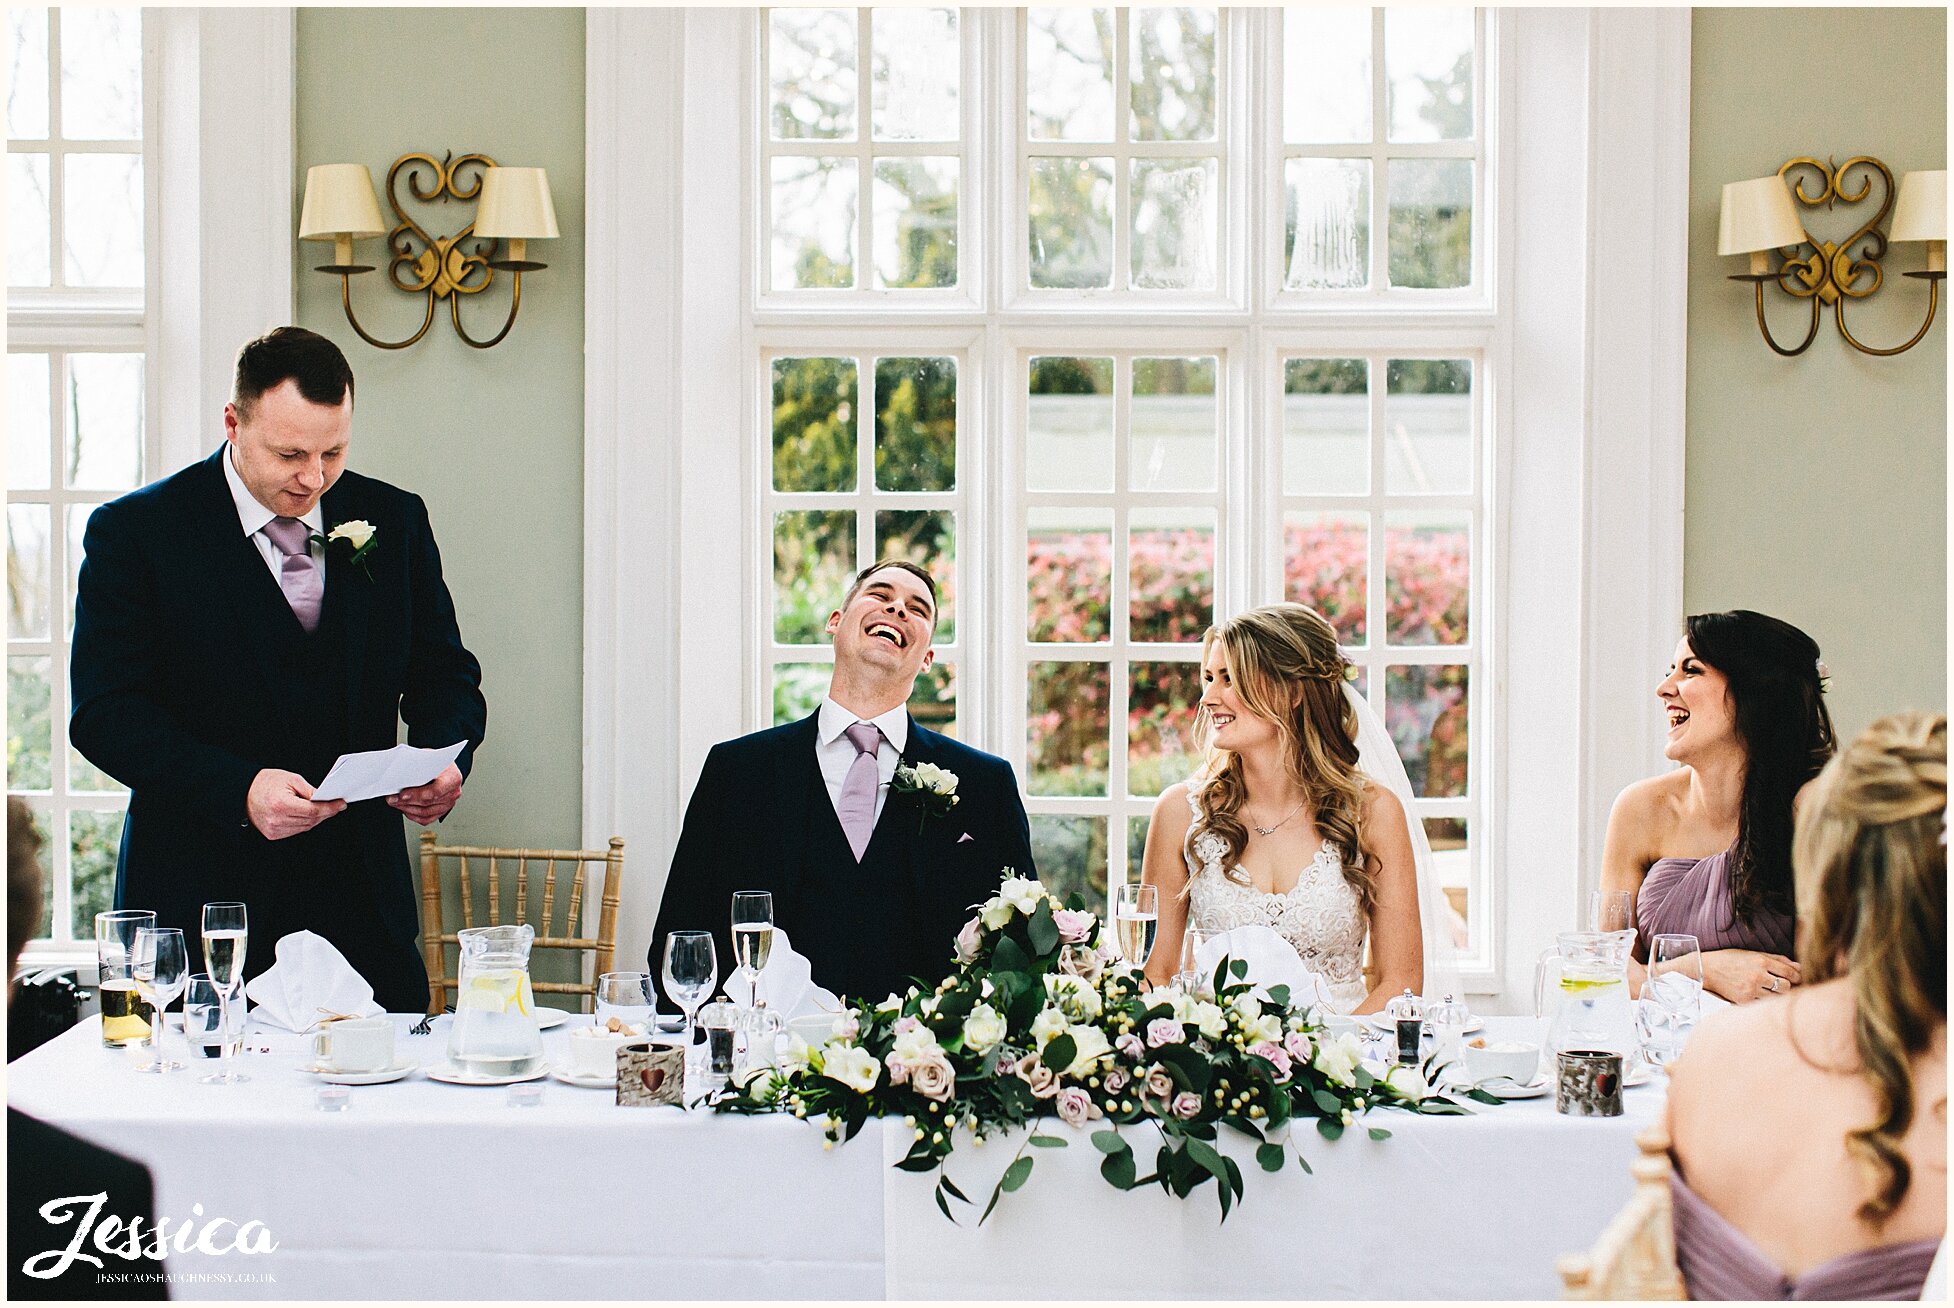 best man tells embarrassing stories about the groom